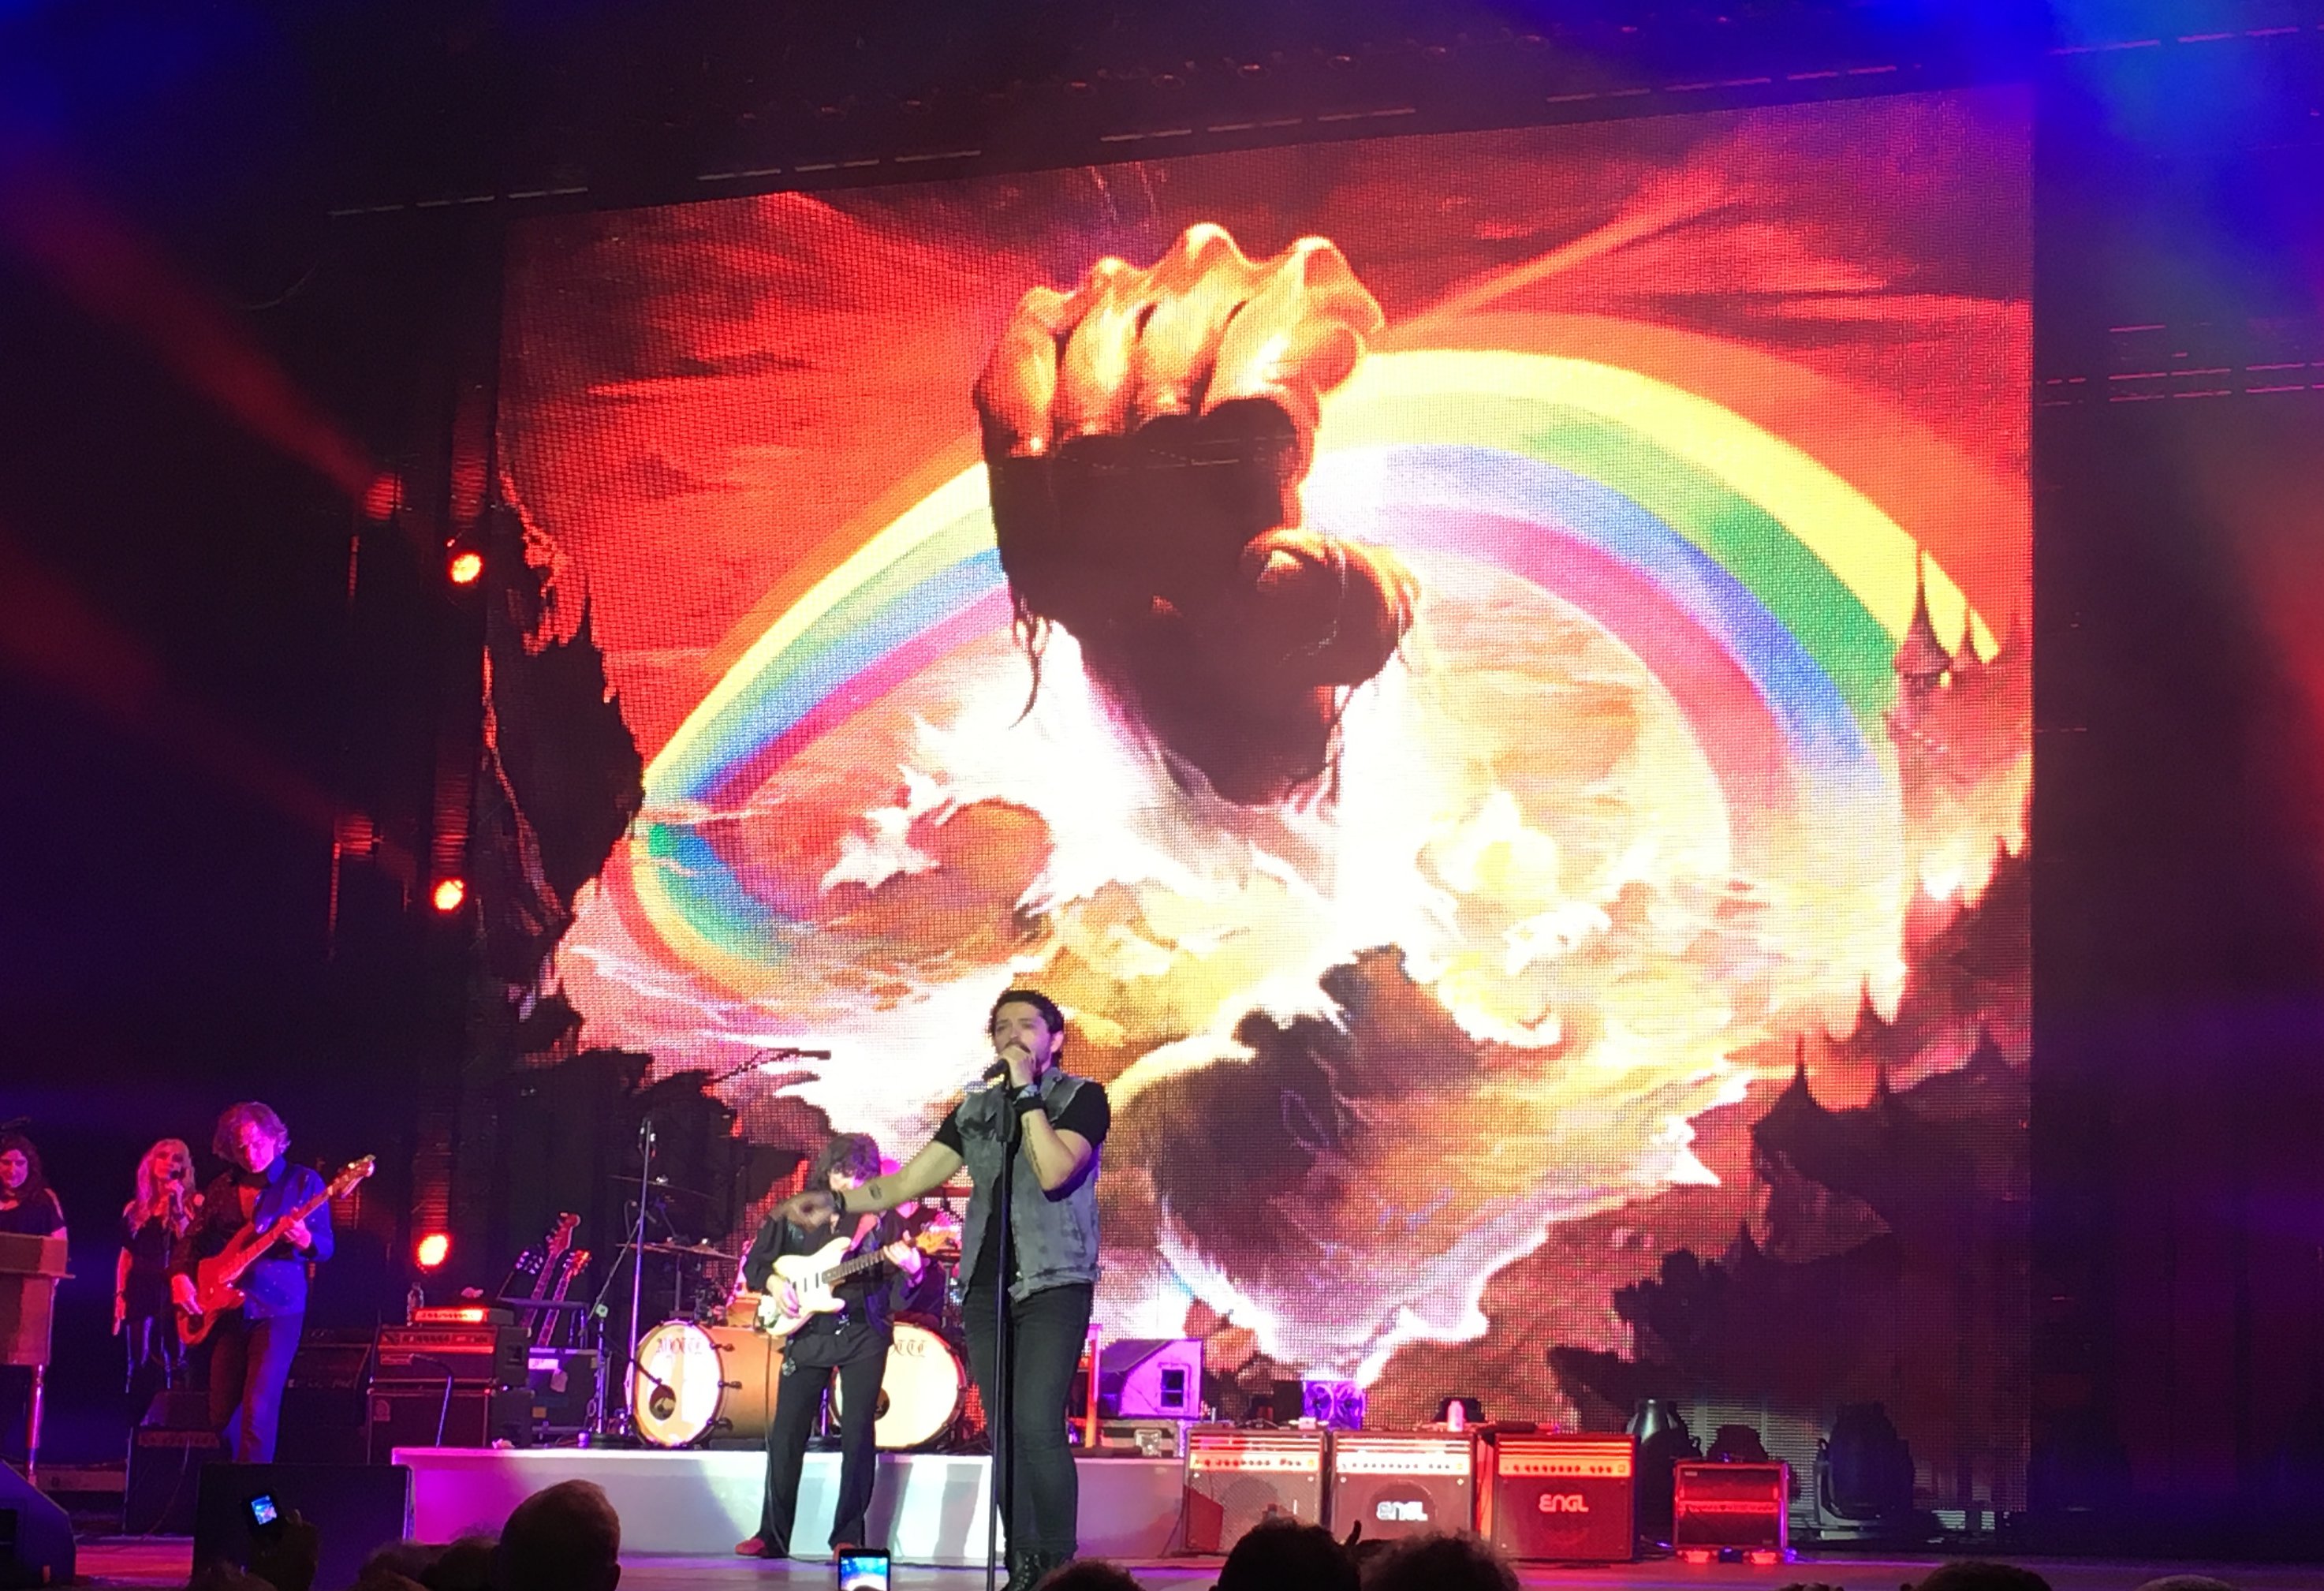 ritchie_blackmore_s_rainbow_headlining_the_stone_free_2017_festival_at_the_o2_35341404416.jpg